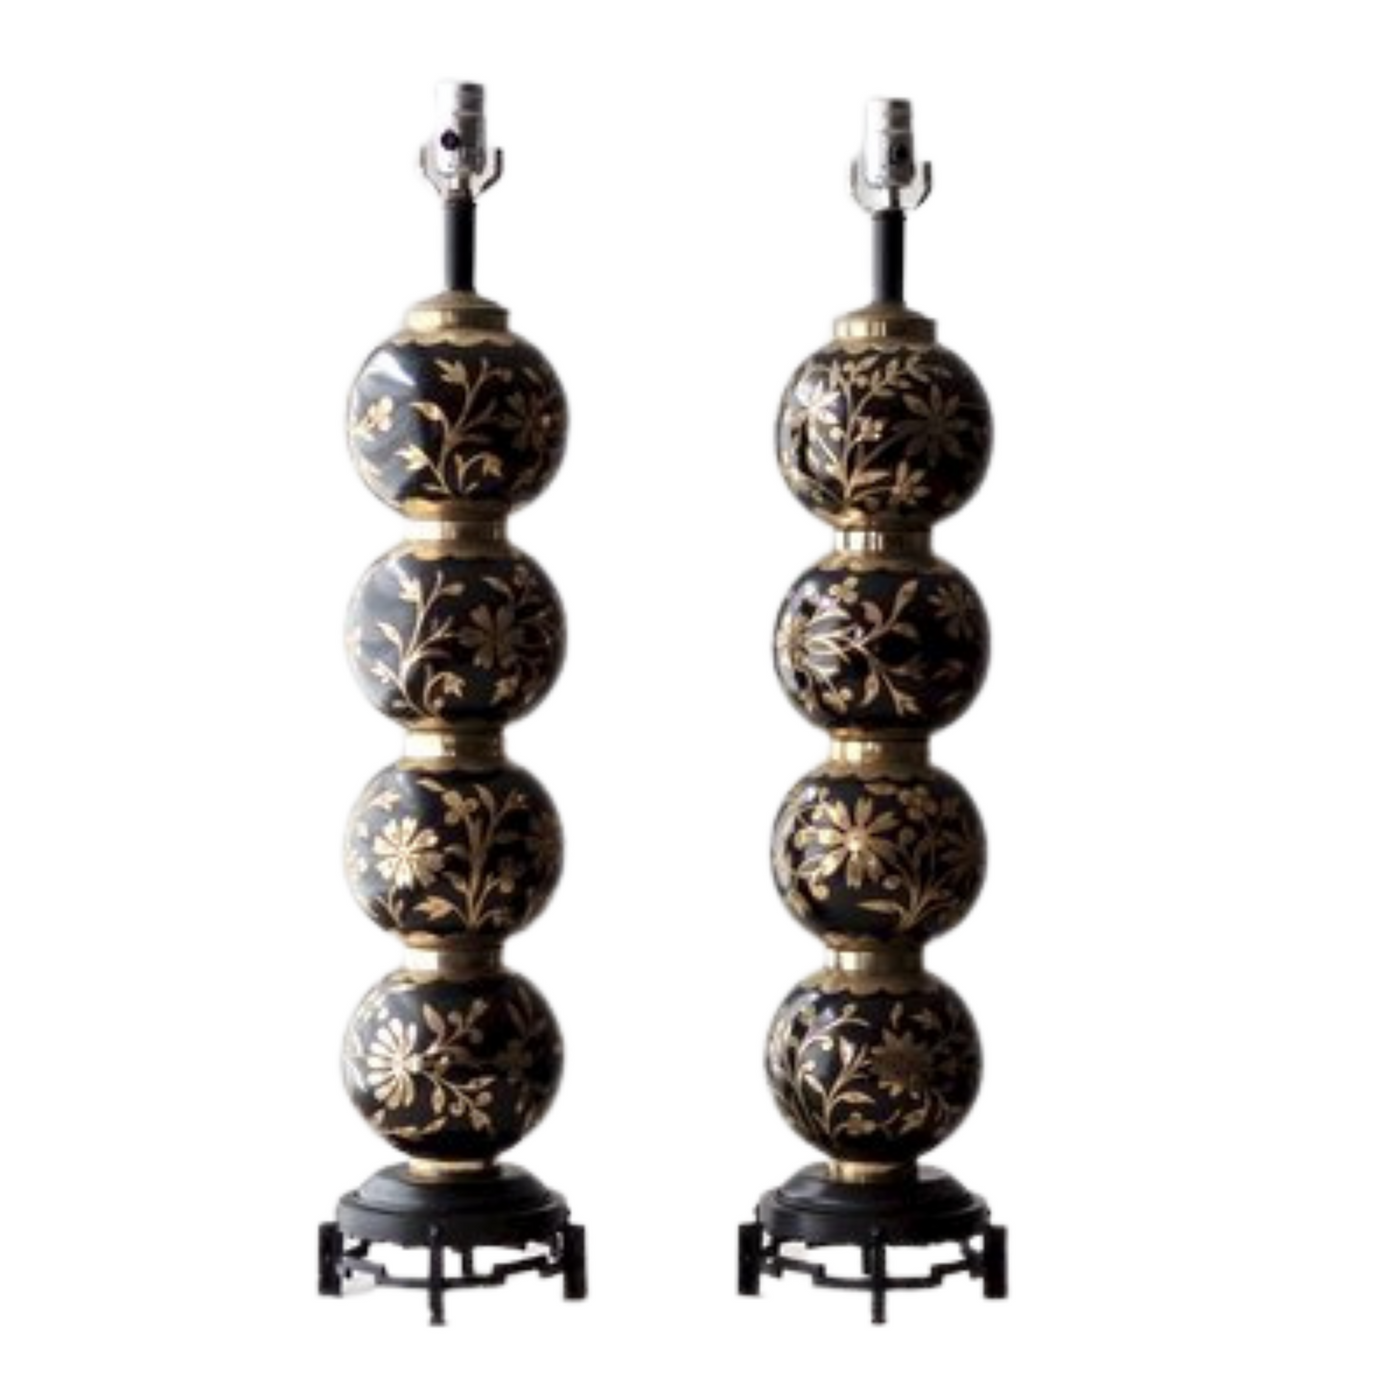 Pair Of Decorative Indian Lamps